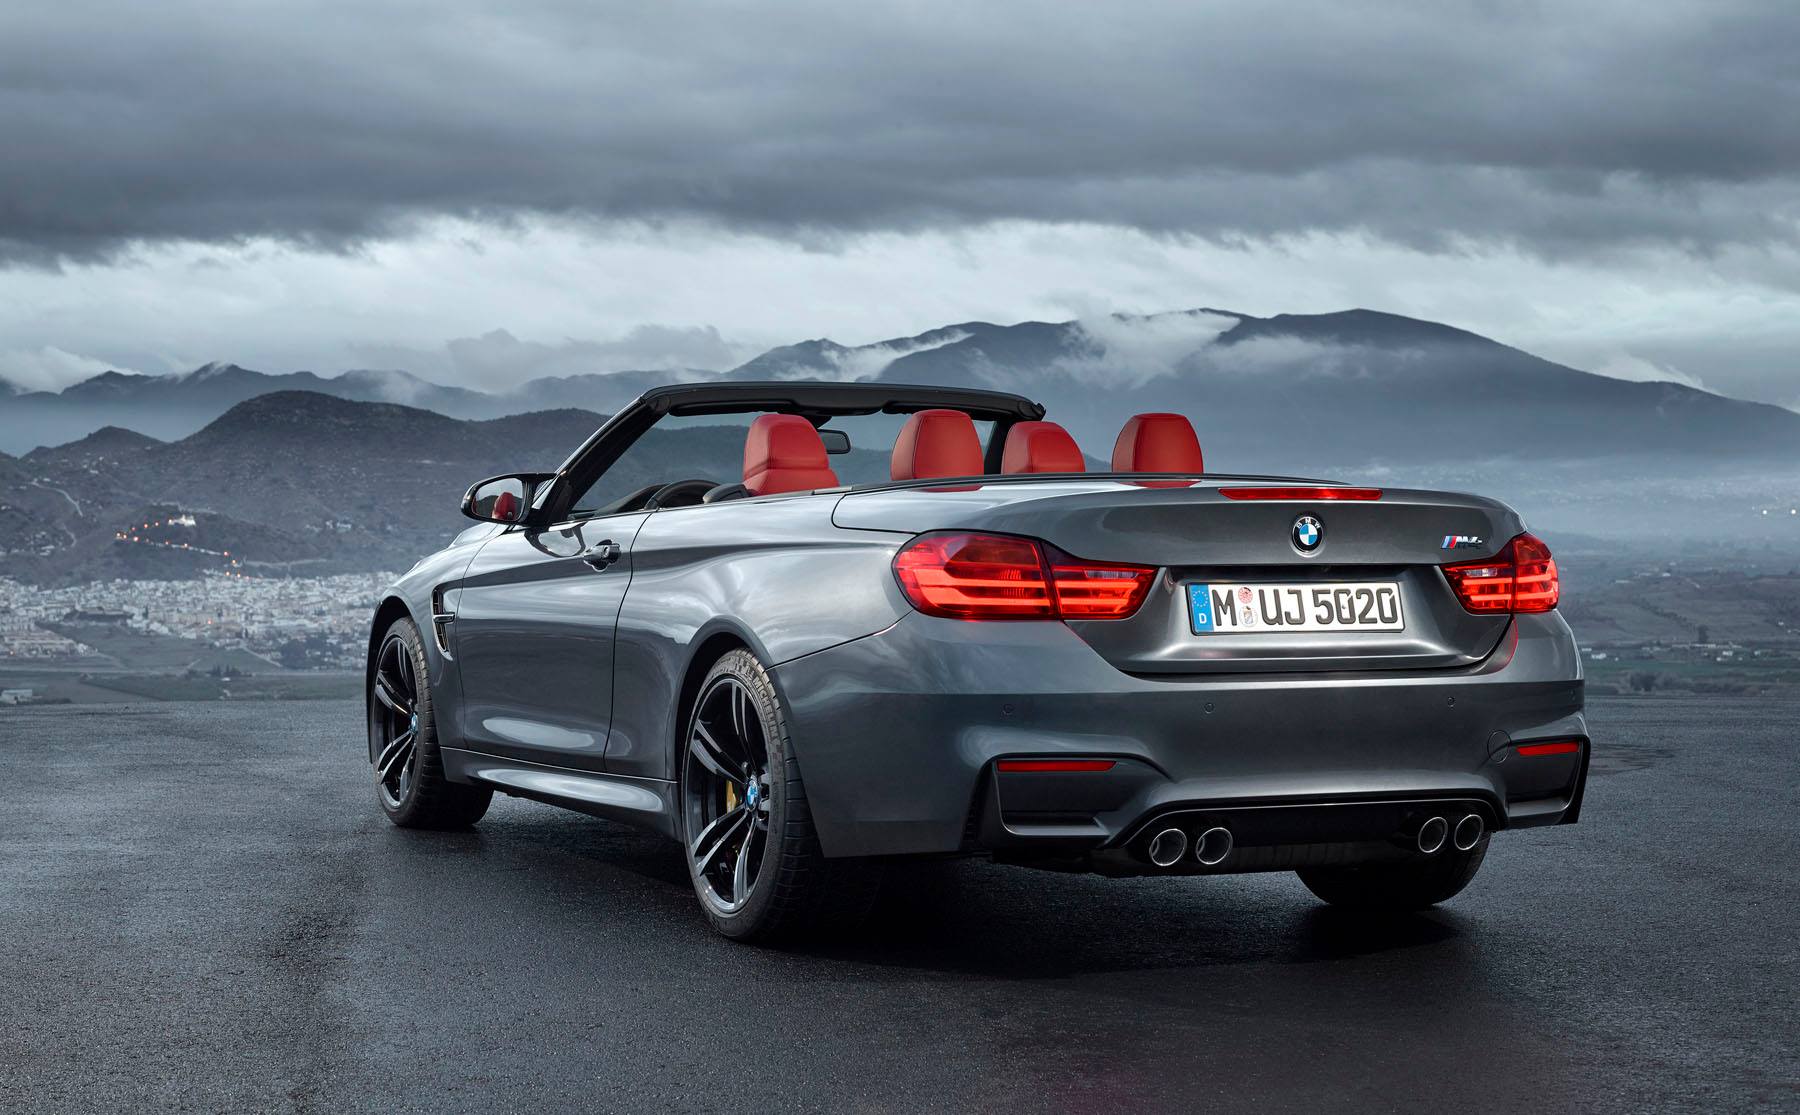 2015 BMW M4 Convertible Revealed